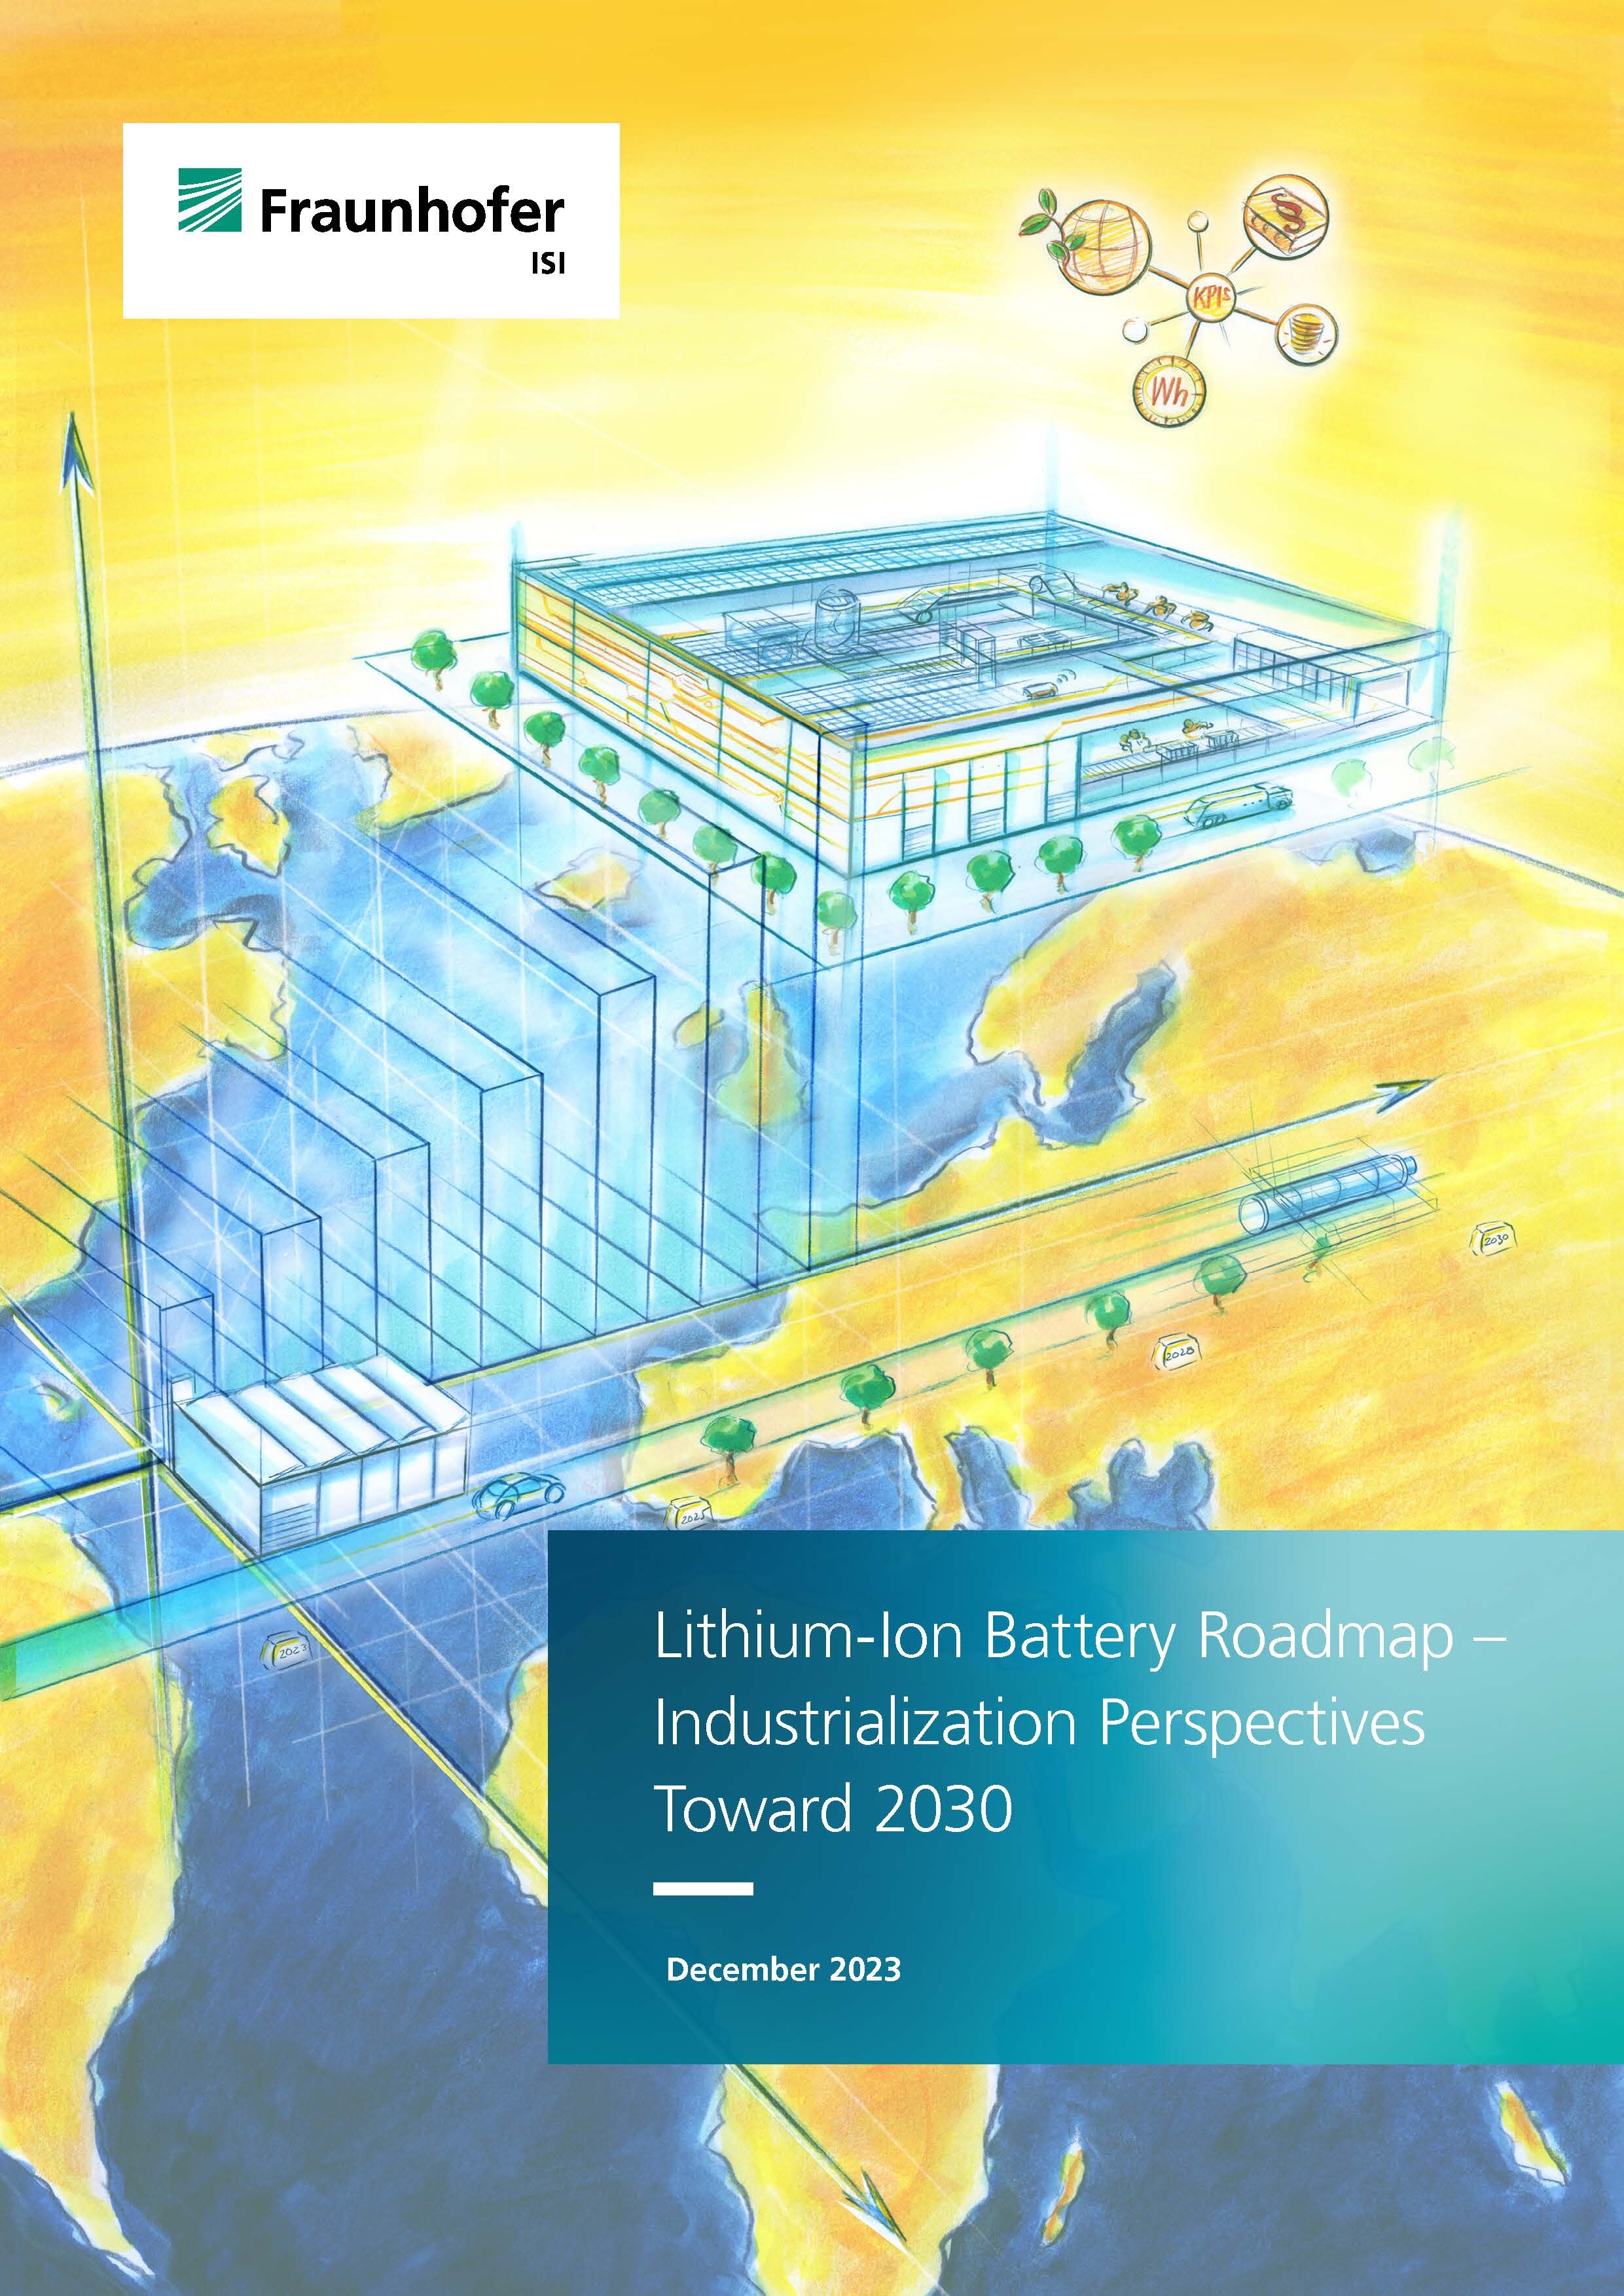 Resting boosts performance of lithium metal batteries